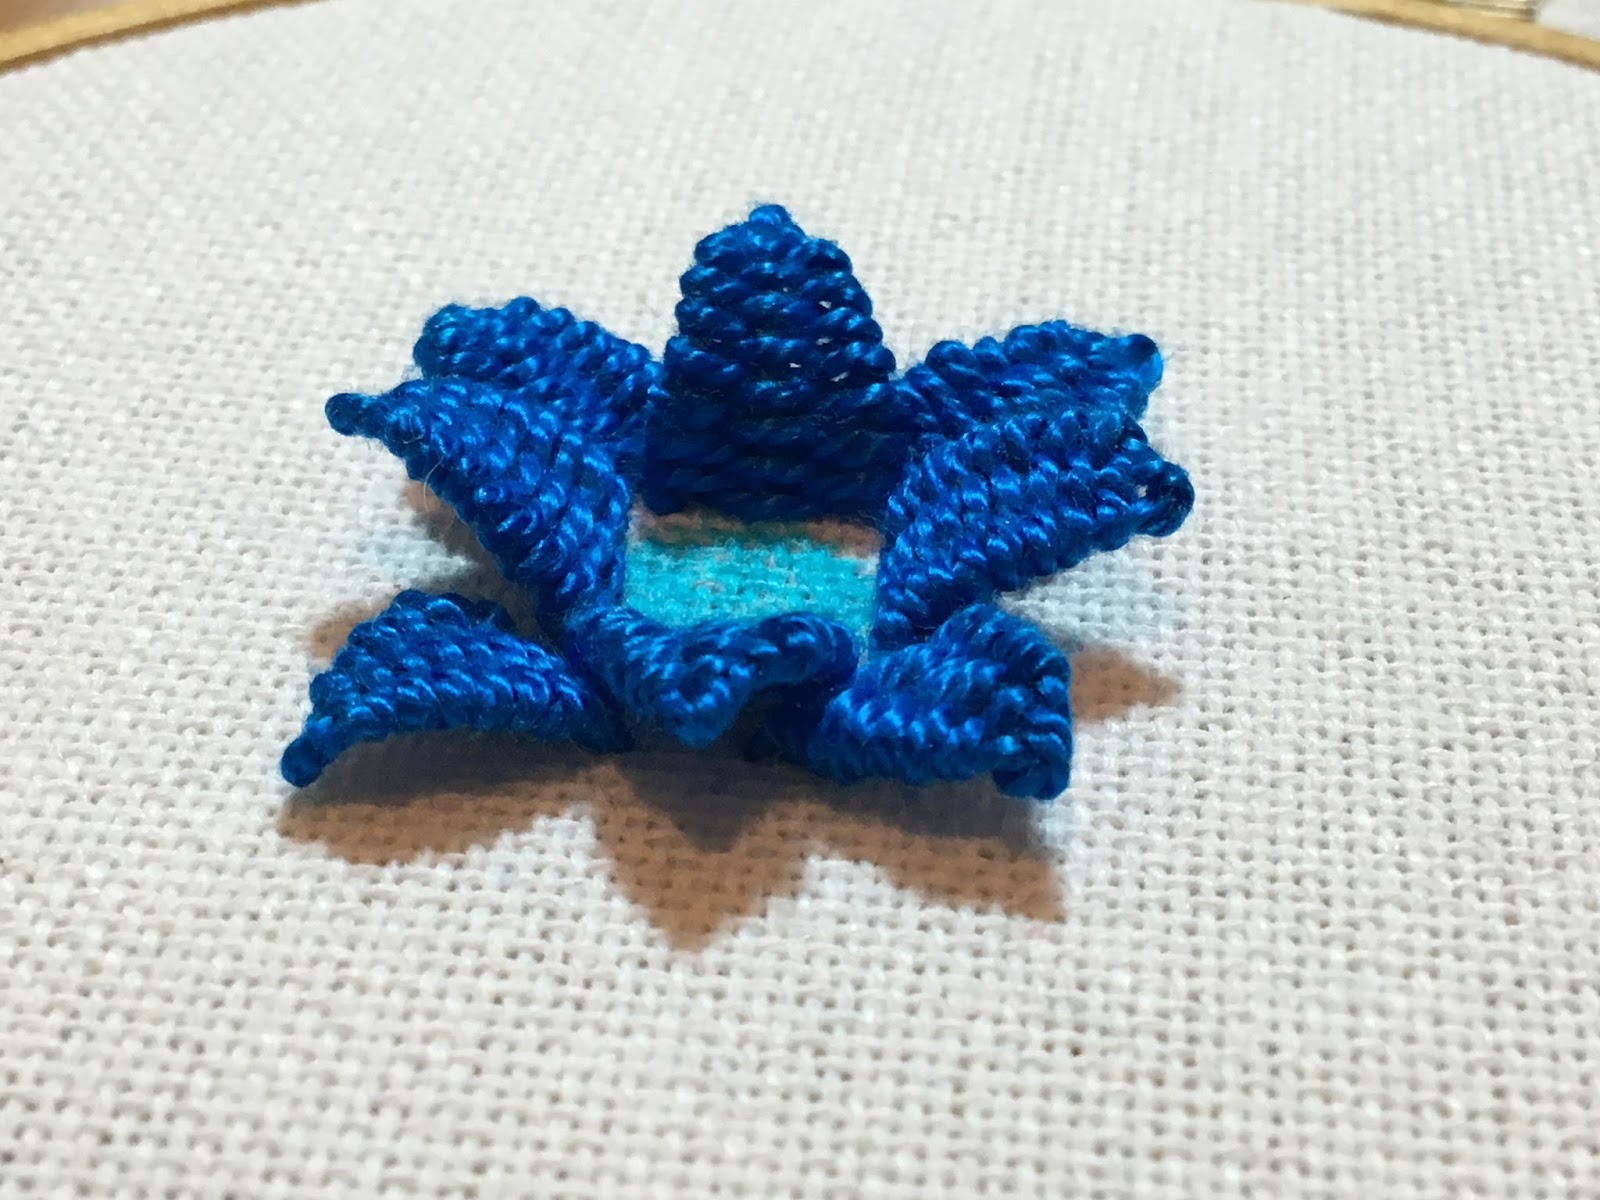 Woven Picot stitch, a tutorial by Michelle for Mooshiestitch Monday on Feeling Stitchy